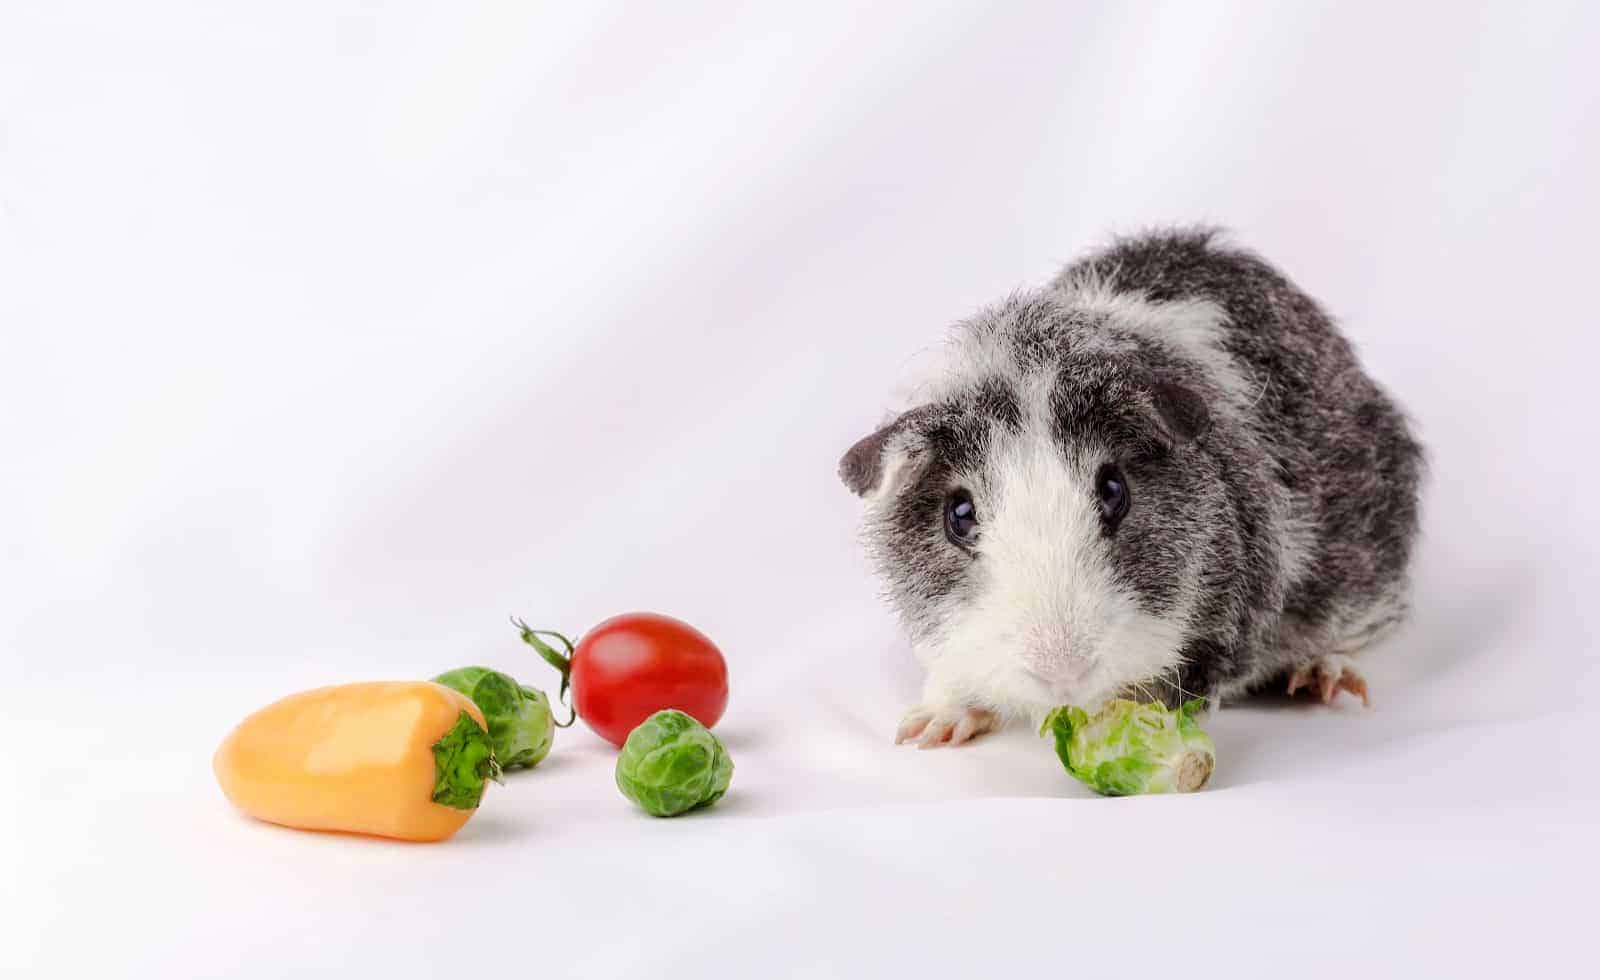 American teddy breed guinea pig on white fabric background eat vegetables.